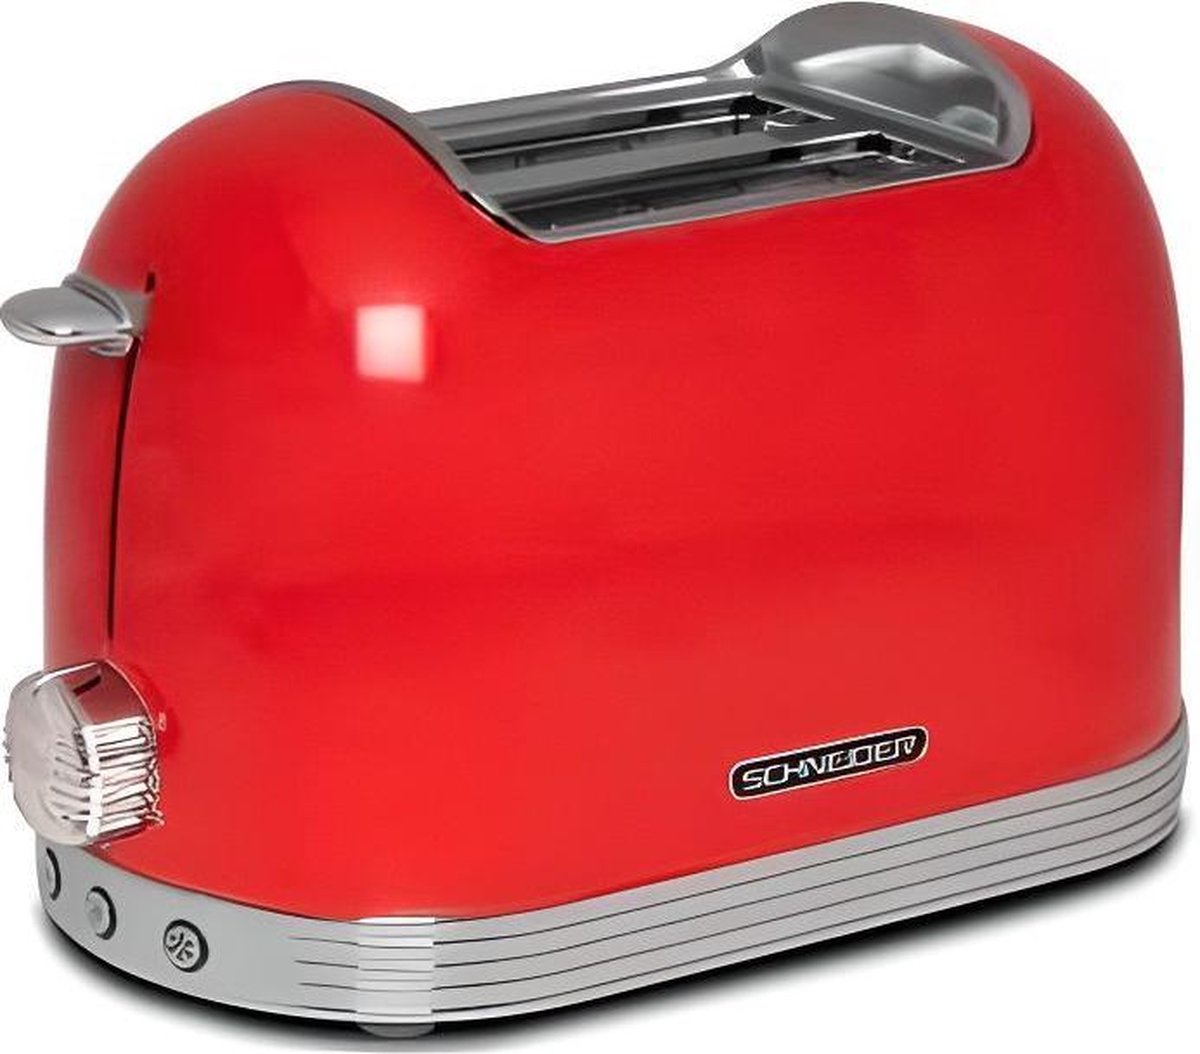 Consumer Group Scto2r Vintage Brooster 2 Sleuven, 20,5 Cm - Rojo